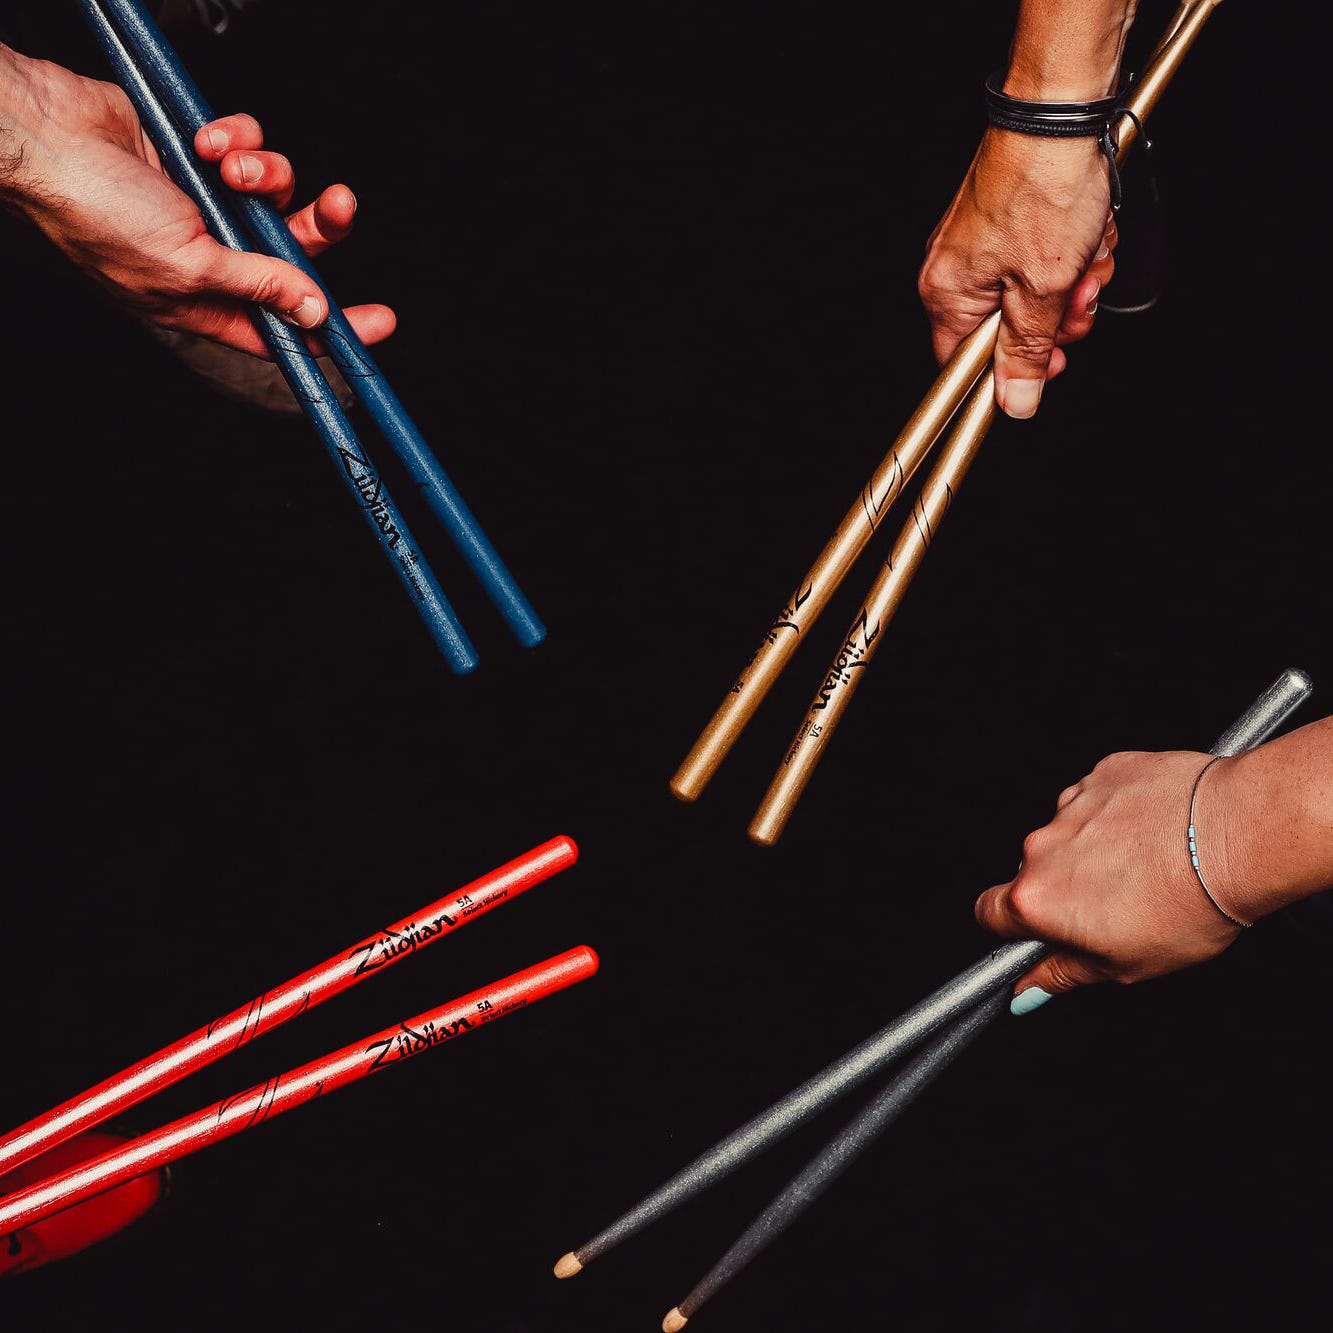 All four color variation of the Chroma Zildjian 5a drumsticks being held by drummers